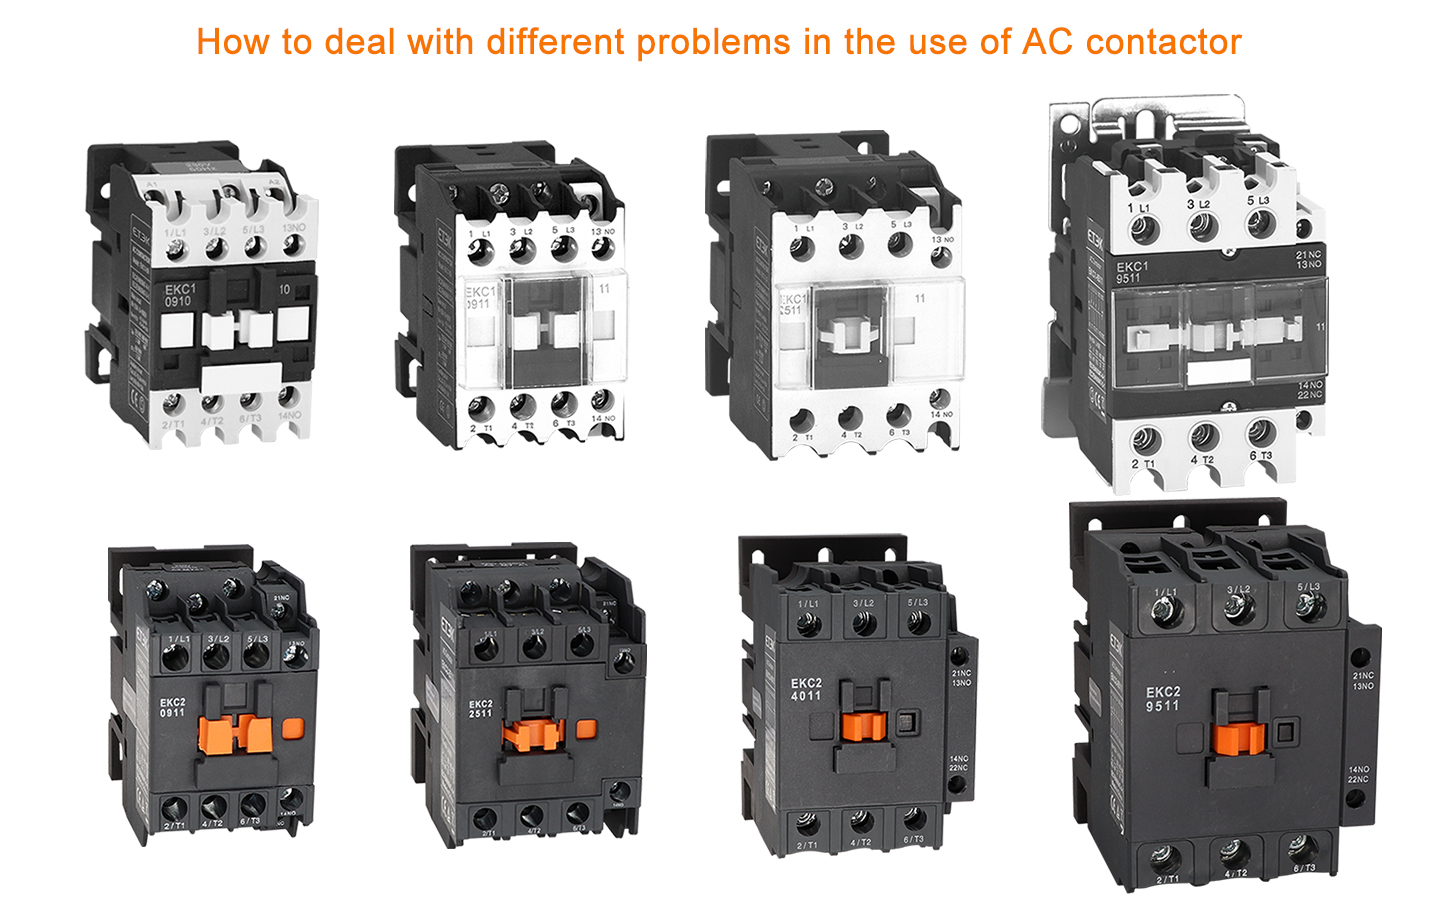 How to deal with different problems in the use of AC contactors